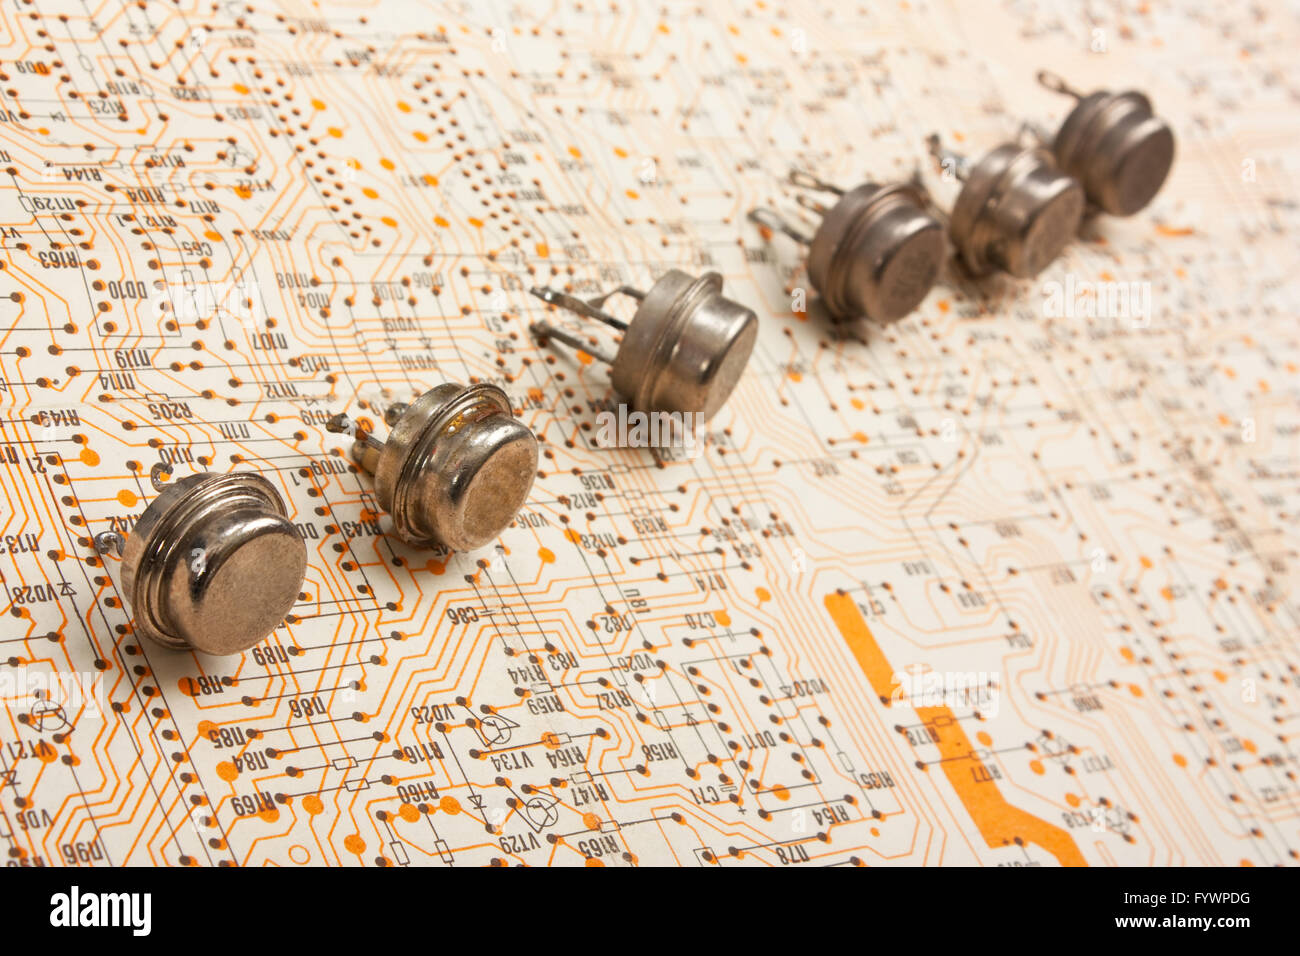 Old electronic components Stock Photo